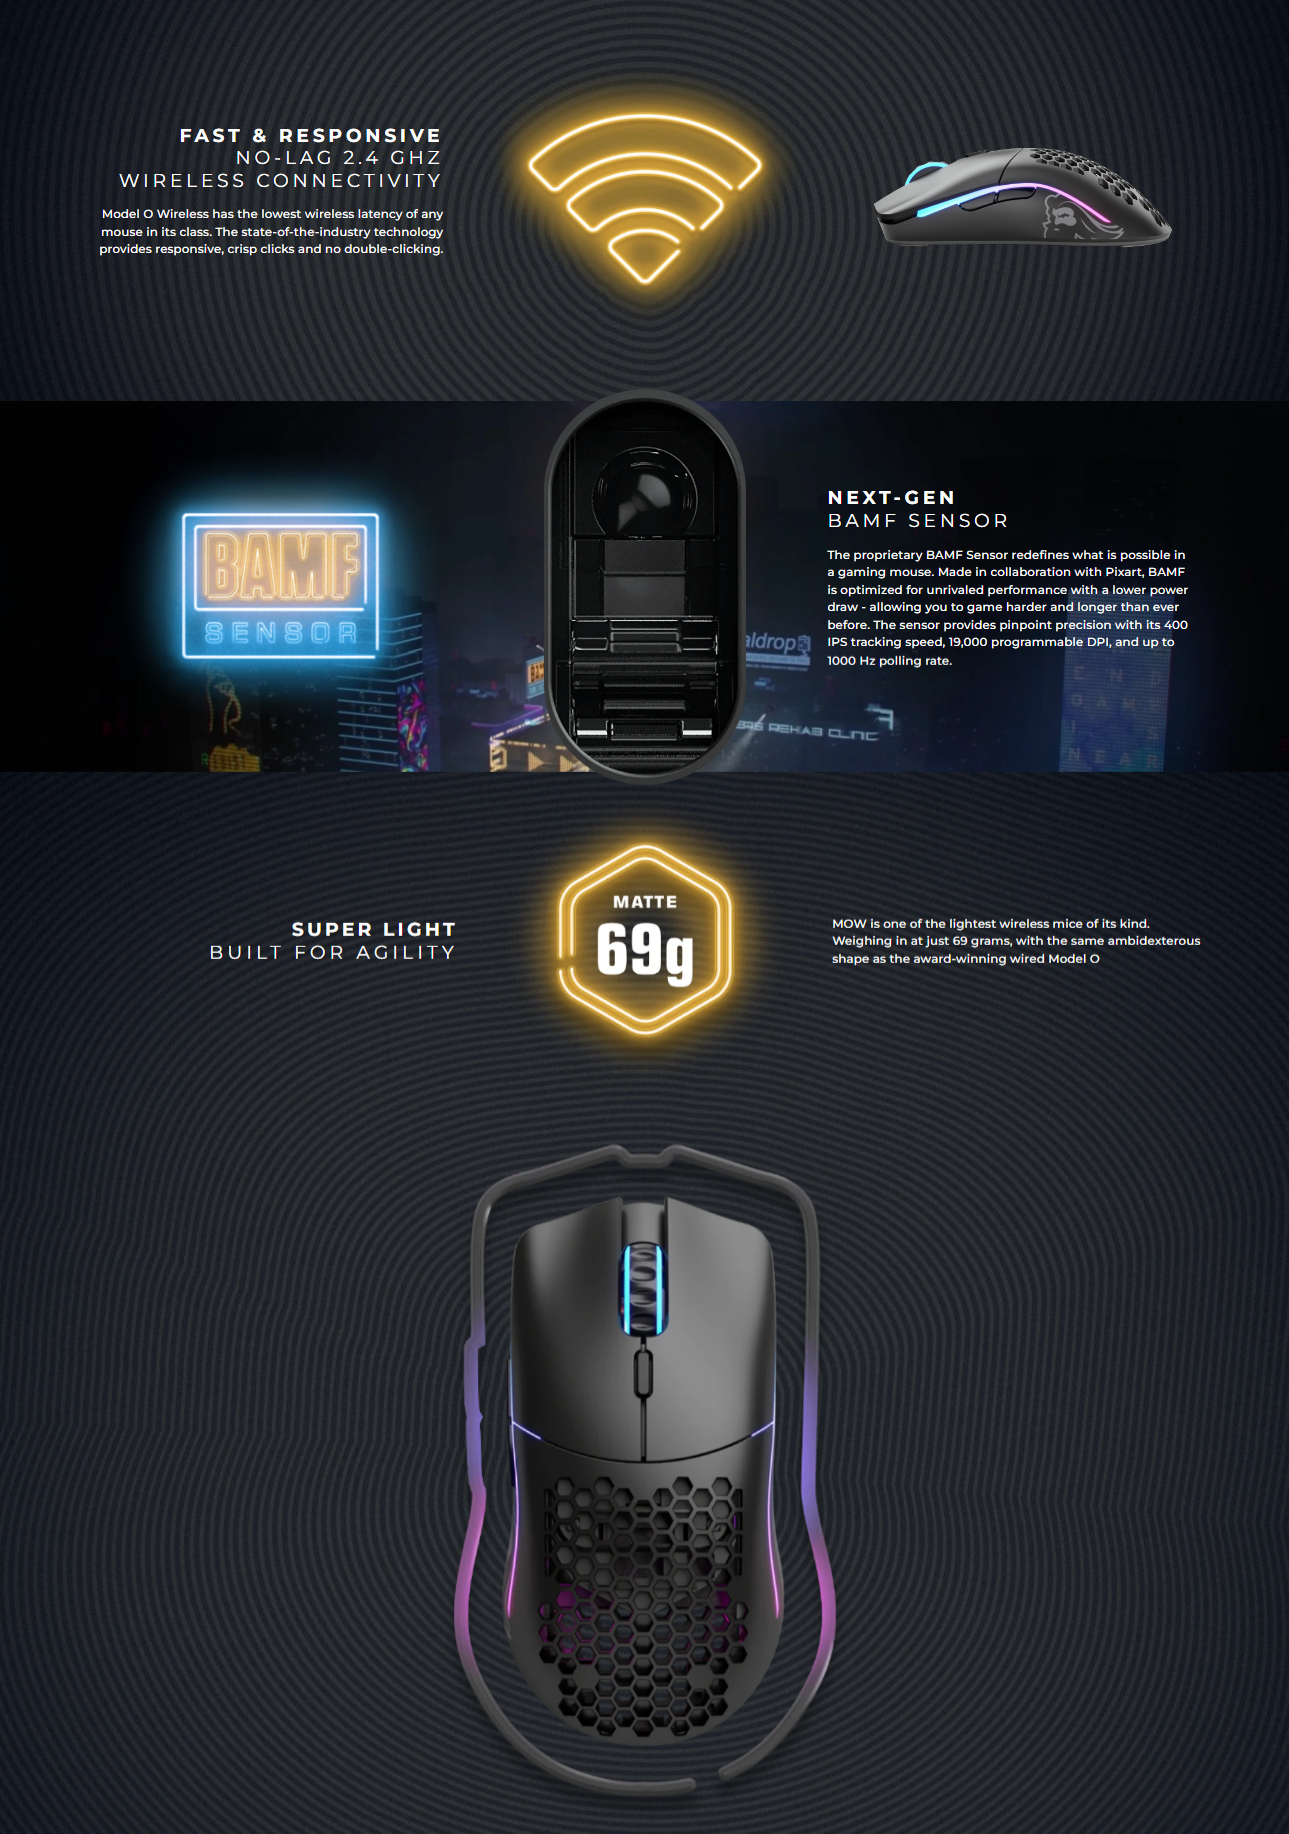 A large marketing image providing additional information about the product Glorious Model O Ambidextrous Wireless Gaming Mouse - Matte Black - Additional alt info not provided